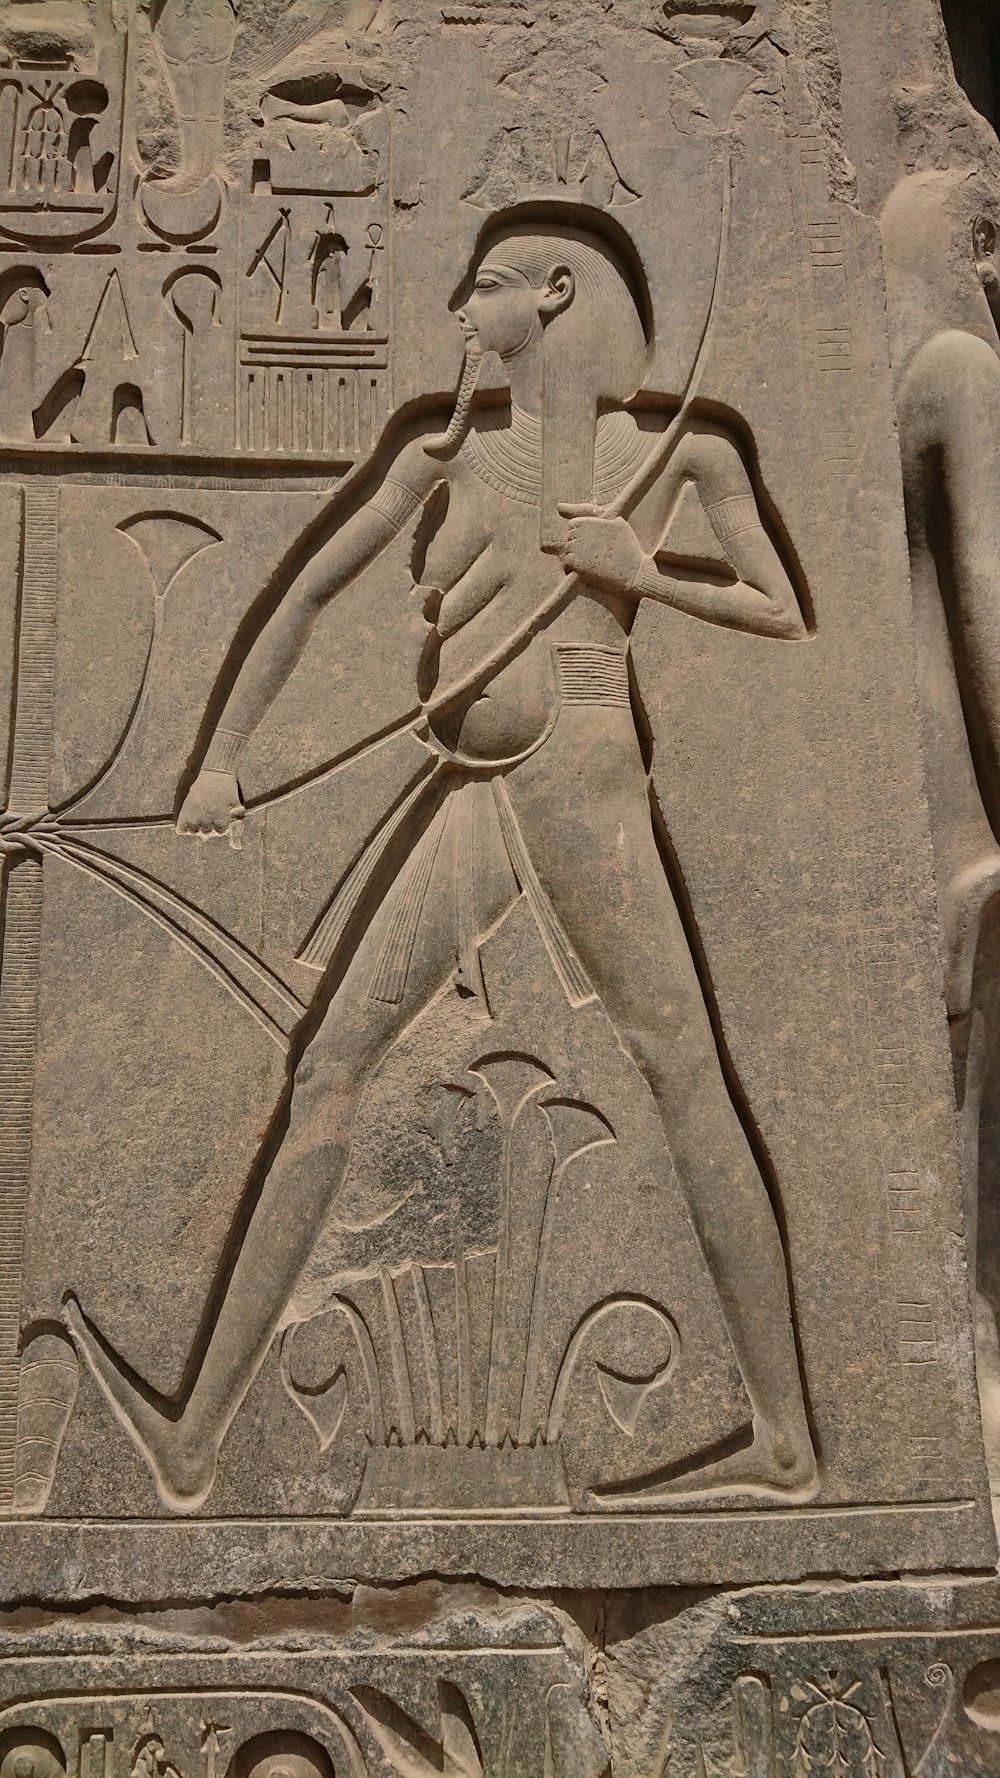 a stone carving of a man with a bow and arrow